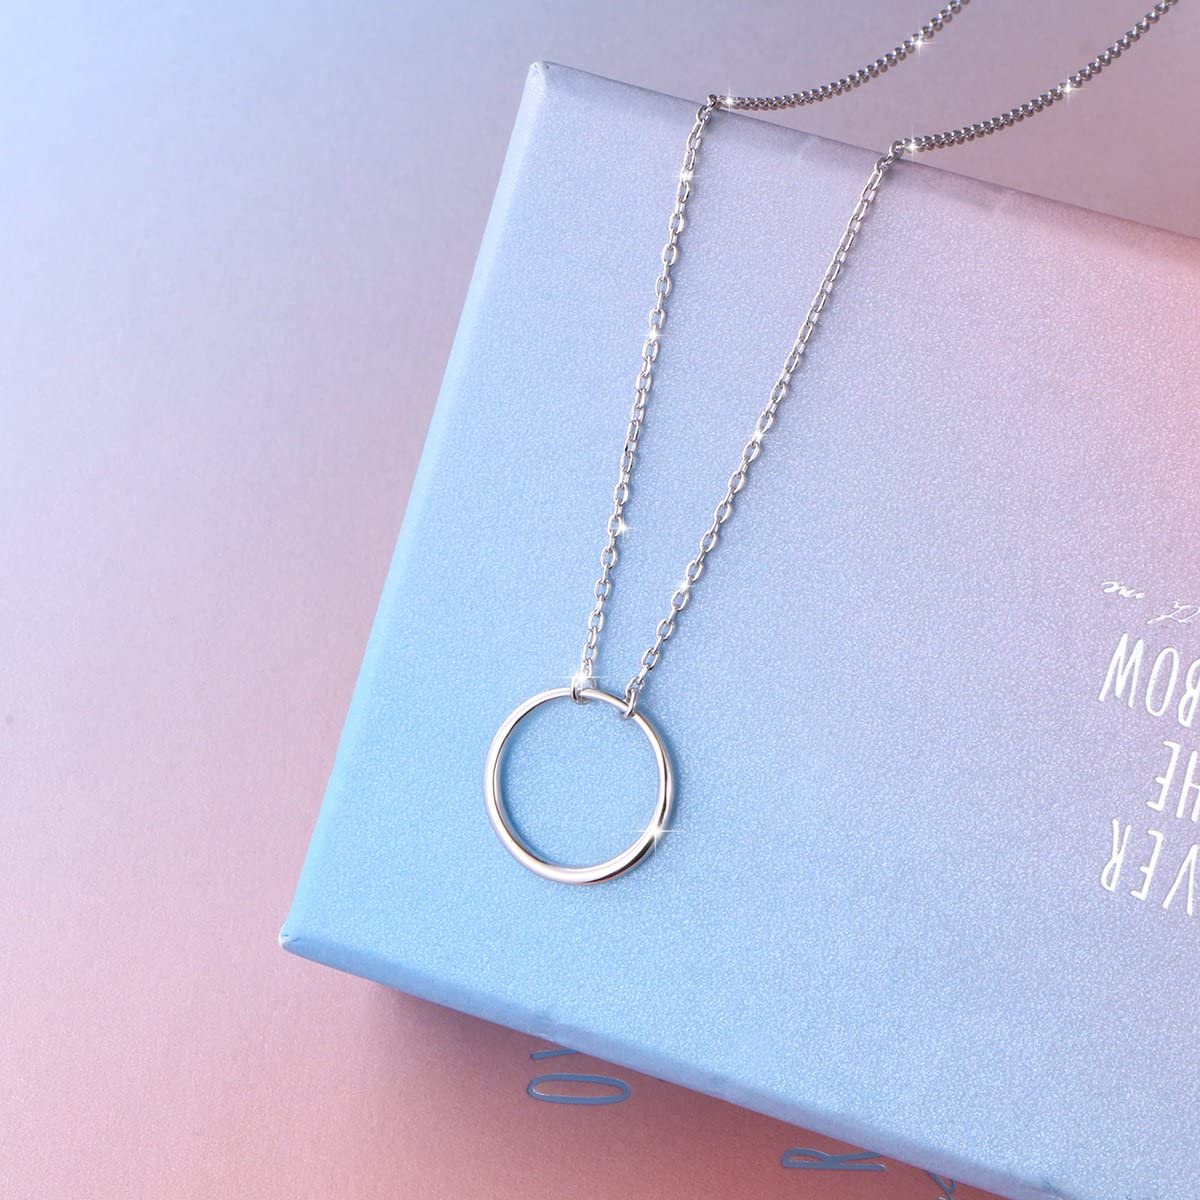 Ladytree S925 Sterling Silver Dainty Simple Circle Pendant Eternity Necklace,Rolo Chain,18+2